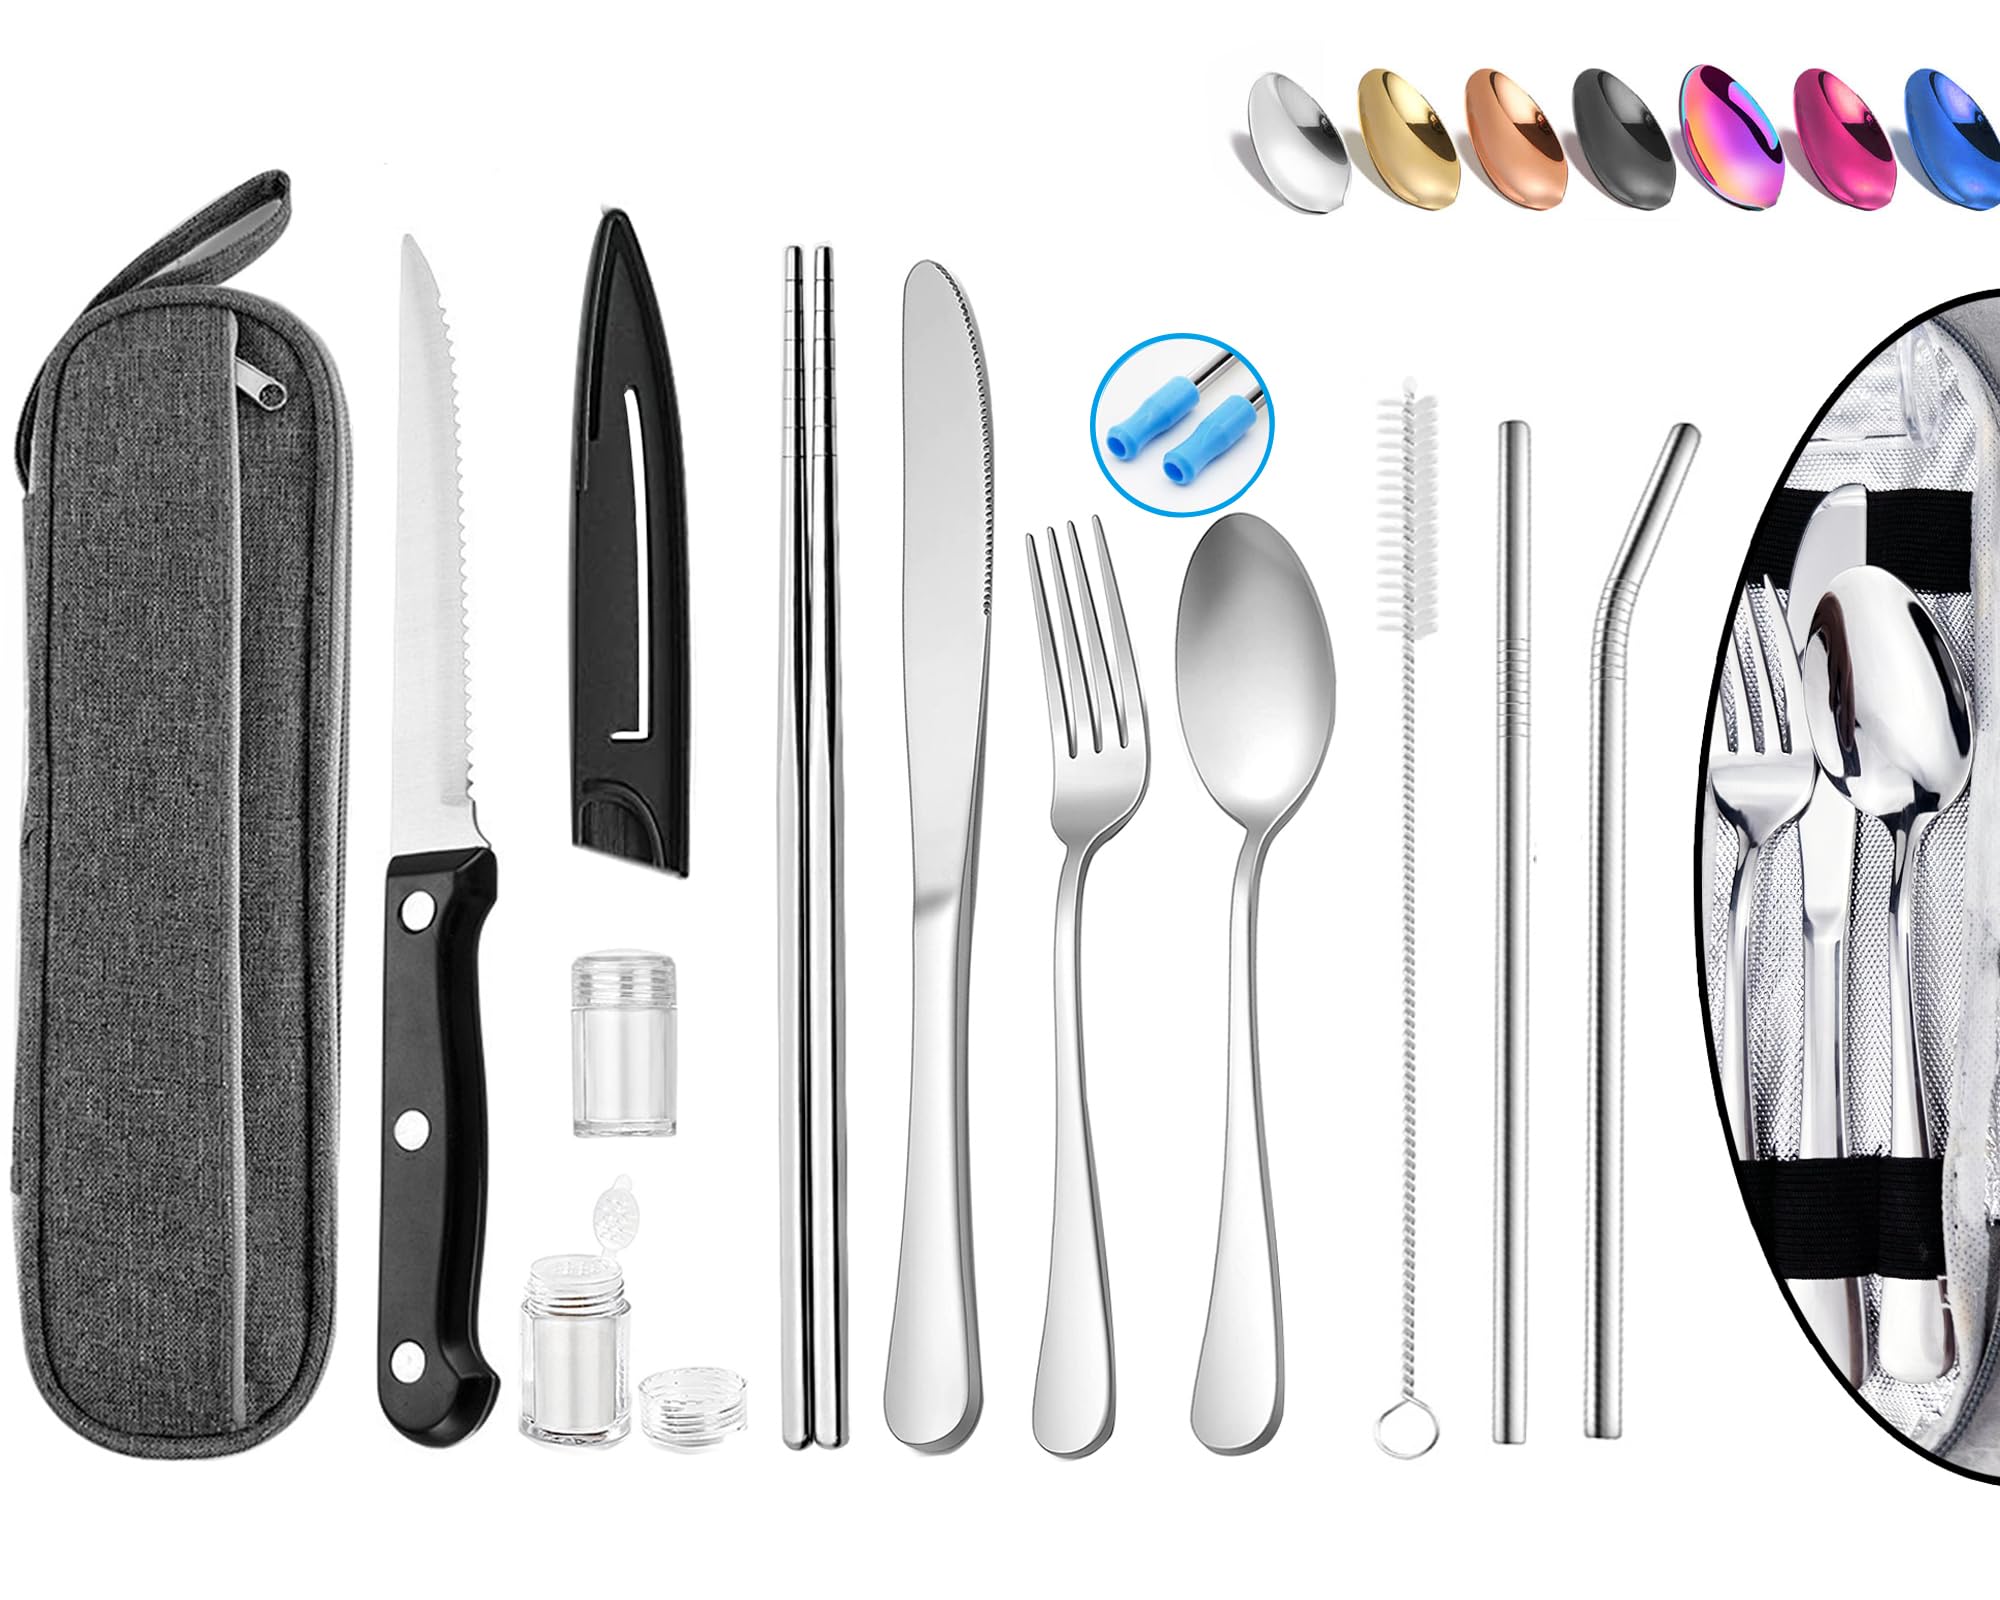 Portable Reusable Travel Utensils Silverware with Case,Travel Camping Cutlery set,Chopsticks and Straw, Flatware Cutlery Set with Case, Stainless steel Travel Utensil set Top (Silver)